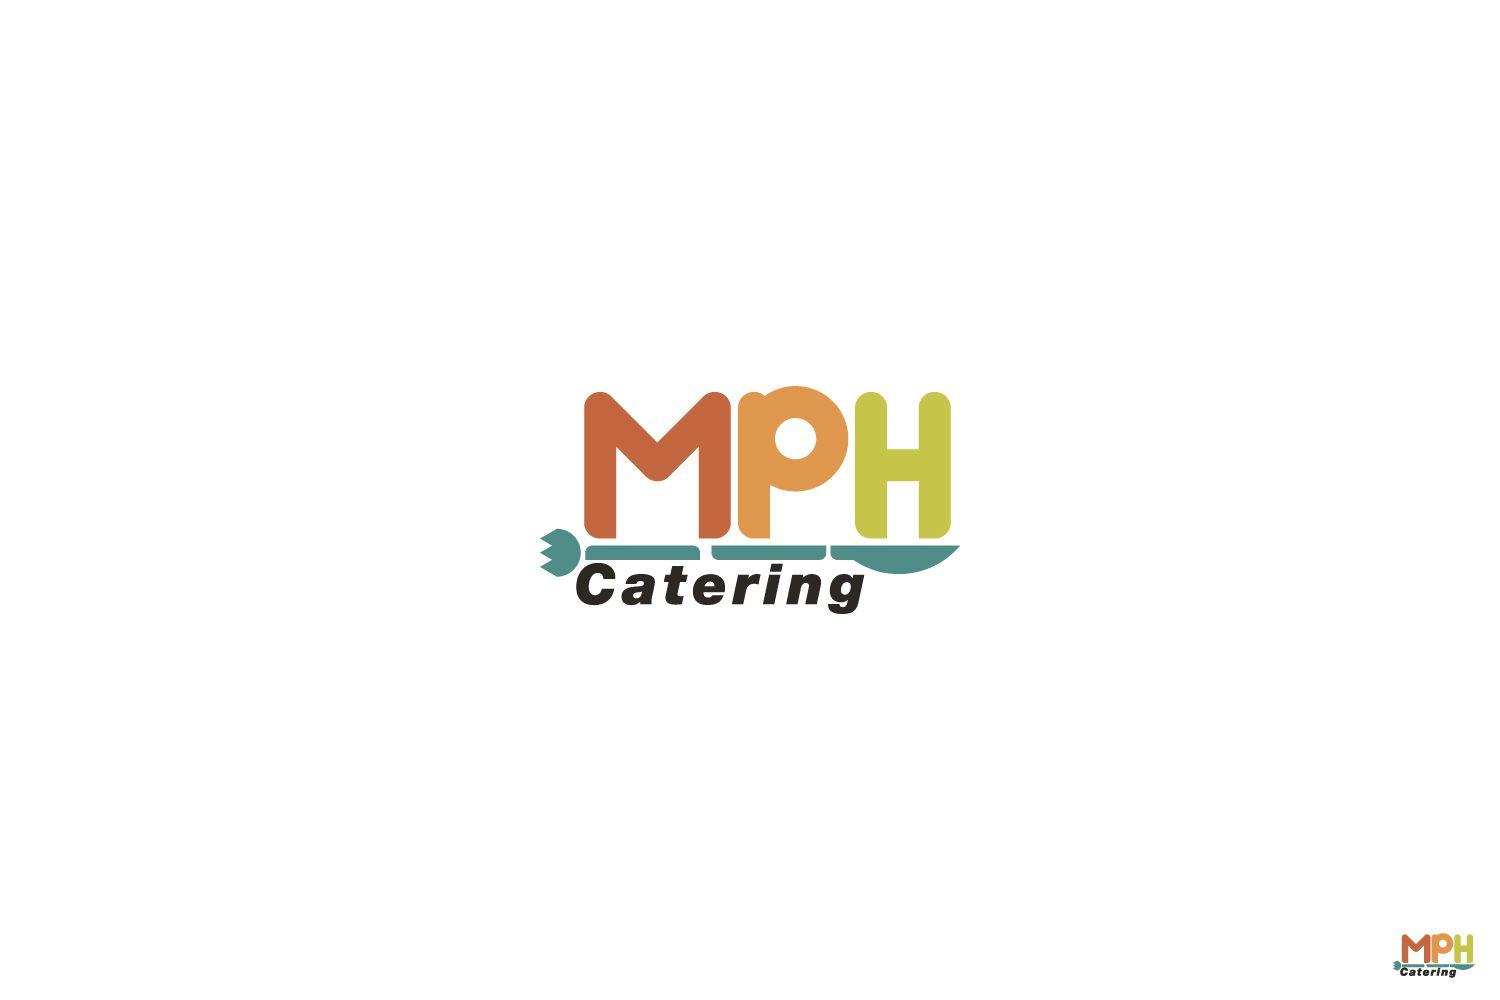 Mph Logo - Catering Logo Design for MPH Catering by Creativefan. Design